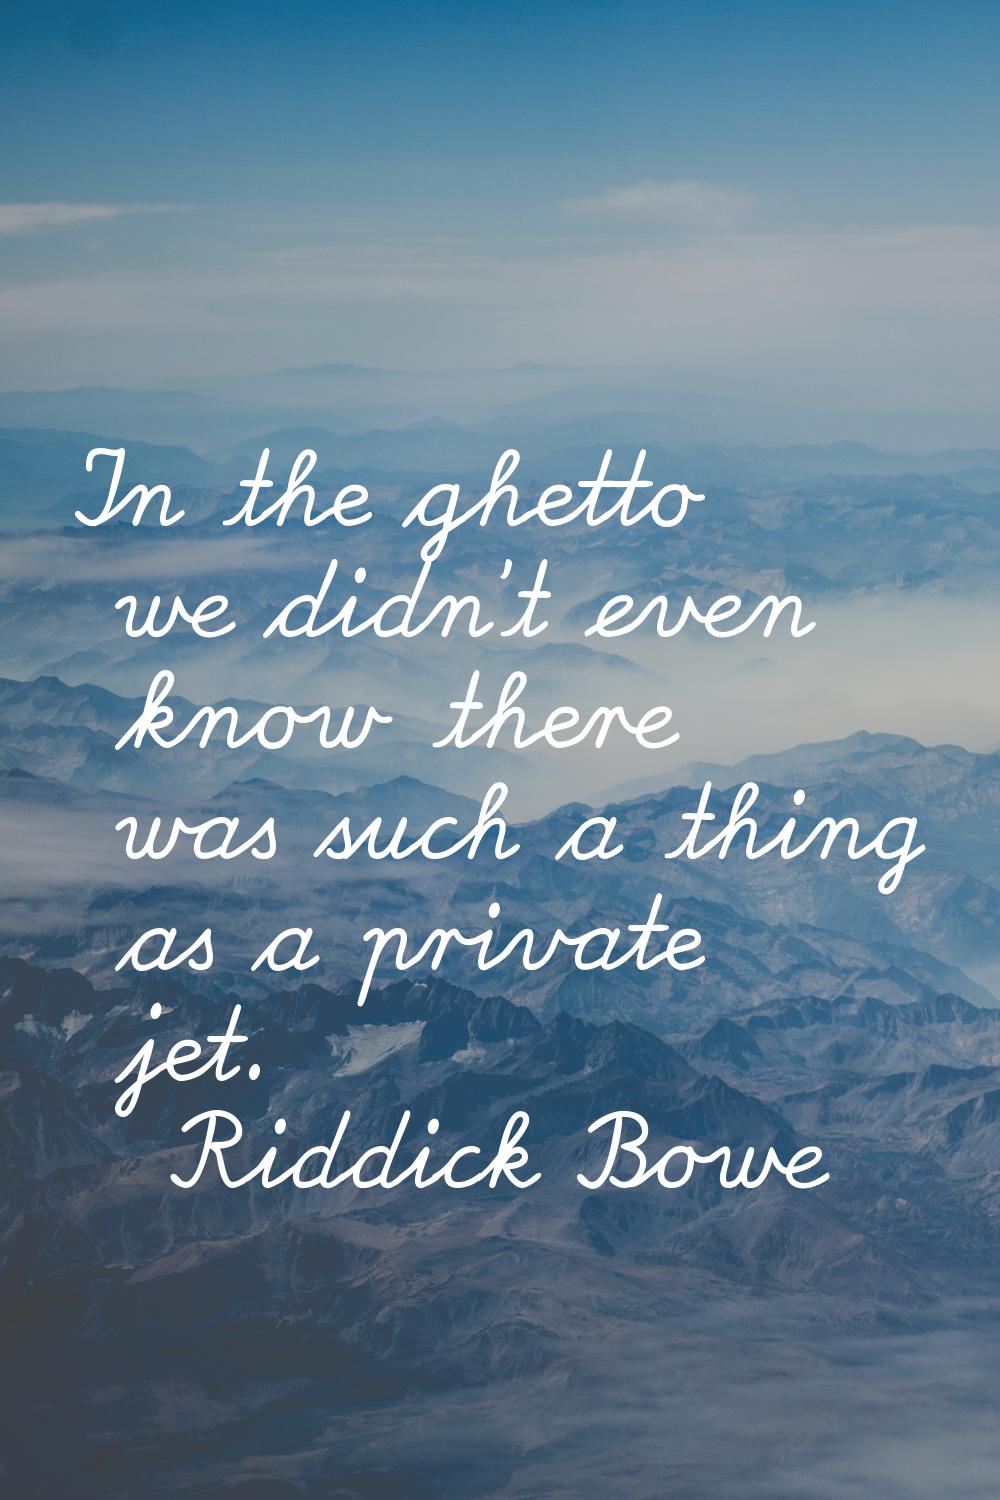 In the ghetto we didn't even know there was such a thing as a private jet.